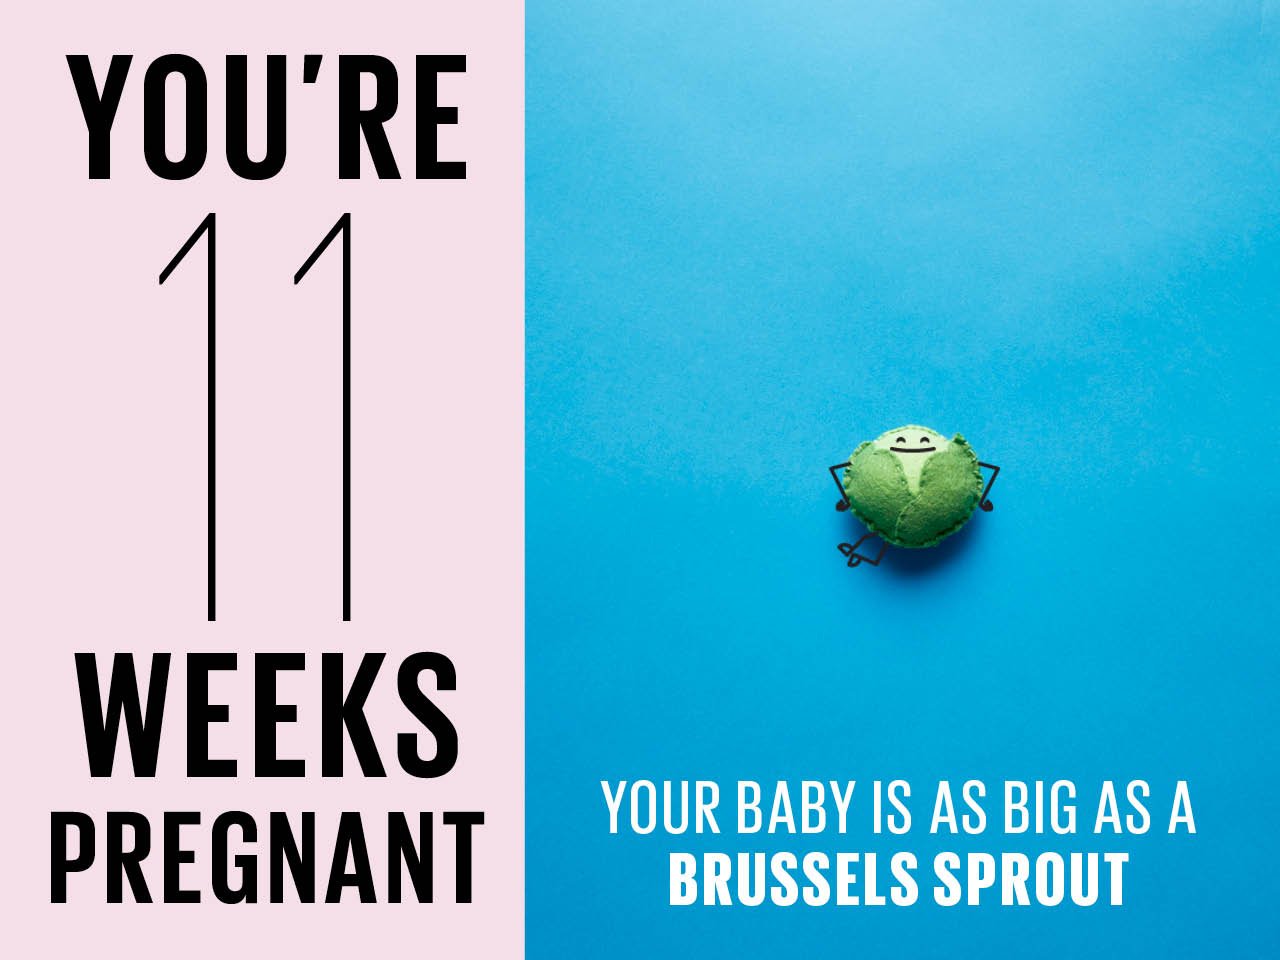 Felt brussels sprout used to show how big baby is at 11 weeks